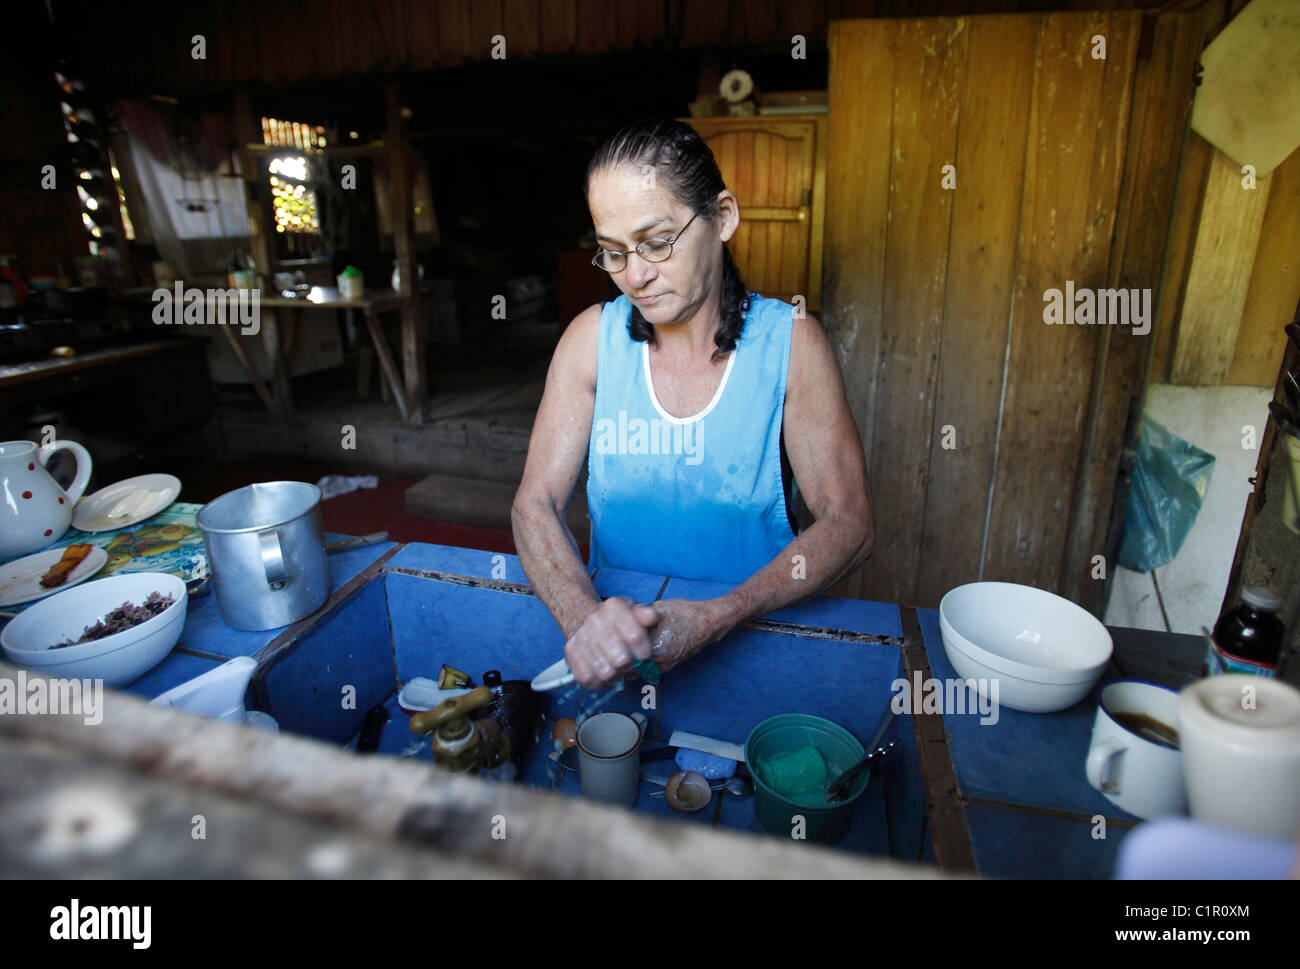 A Costa Rican woman washes dishes in her kitchen at home in the region of Volcan Tenorio, Costa Rica Stock Photo